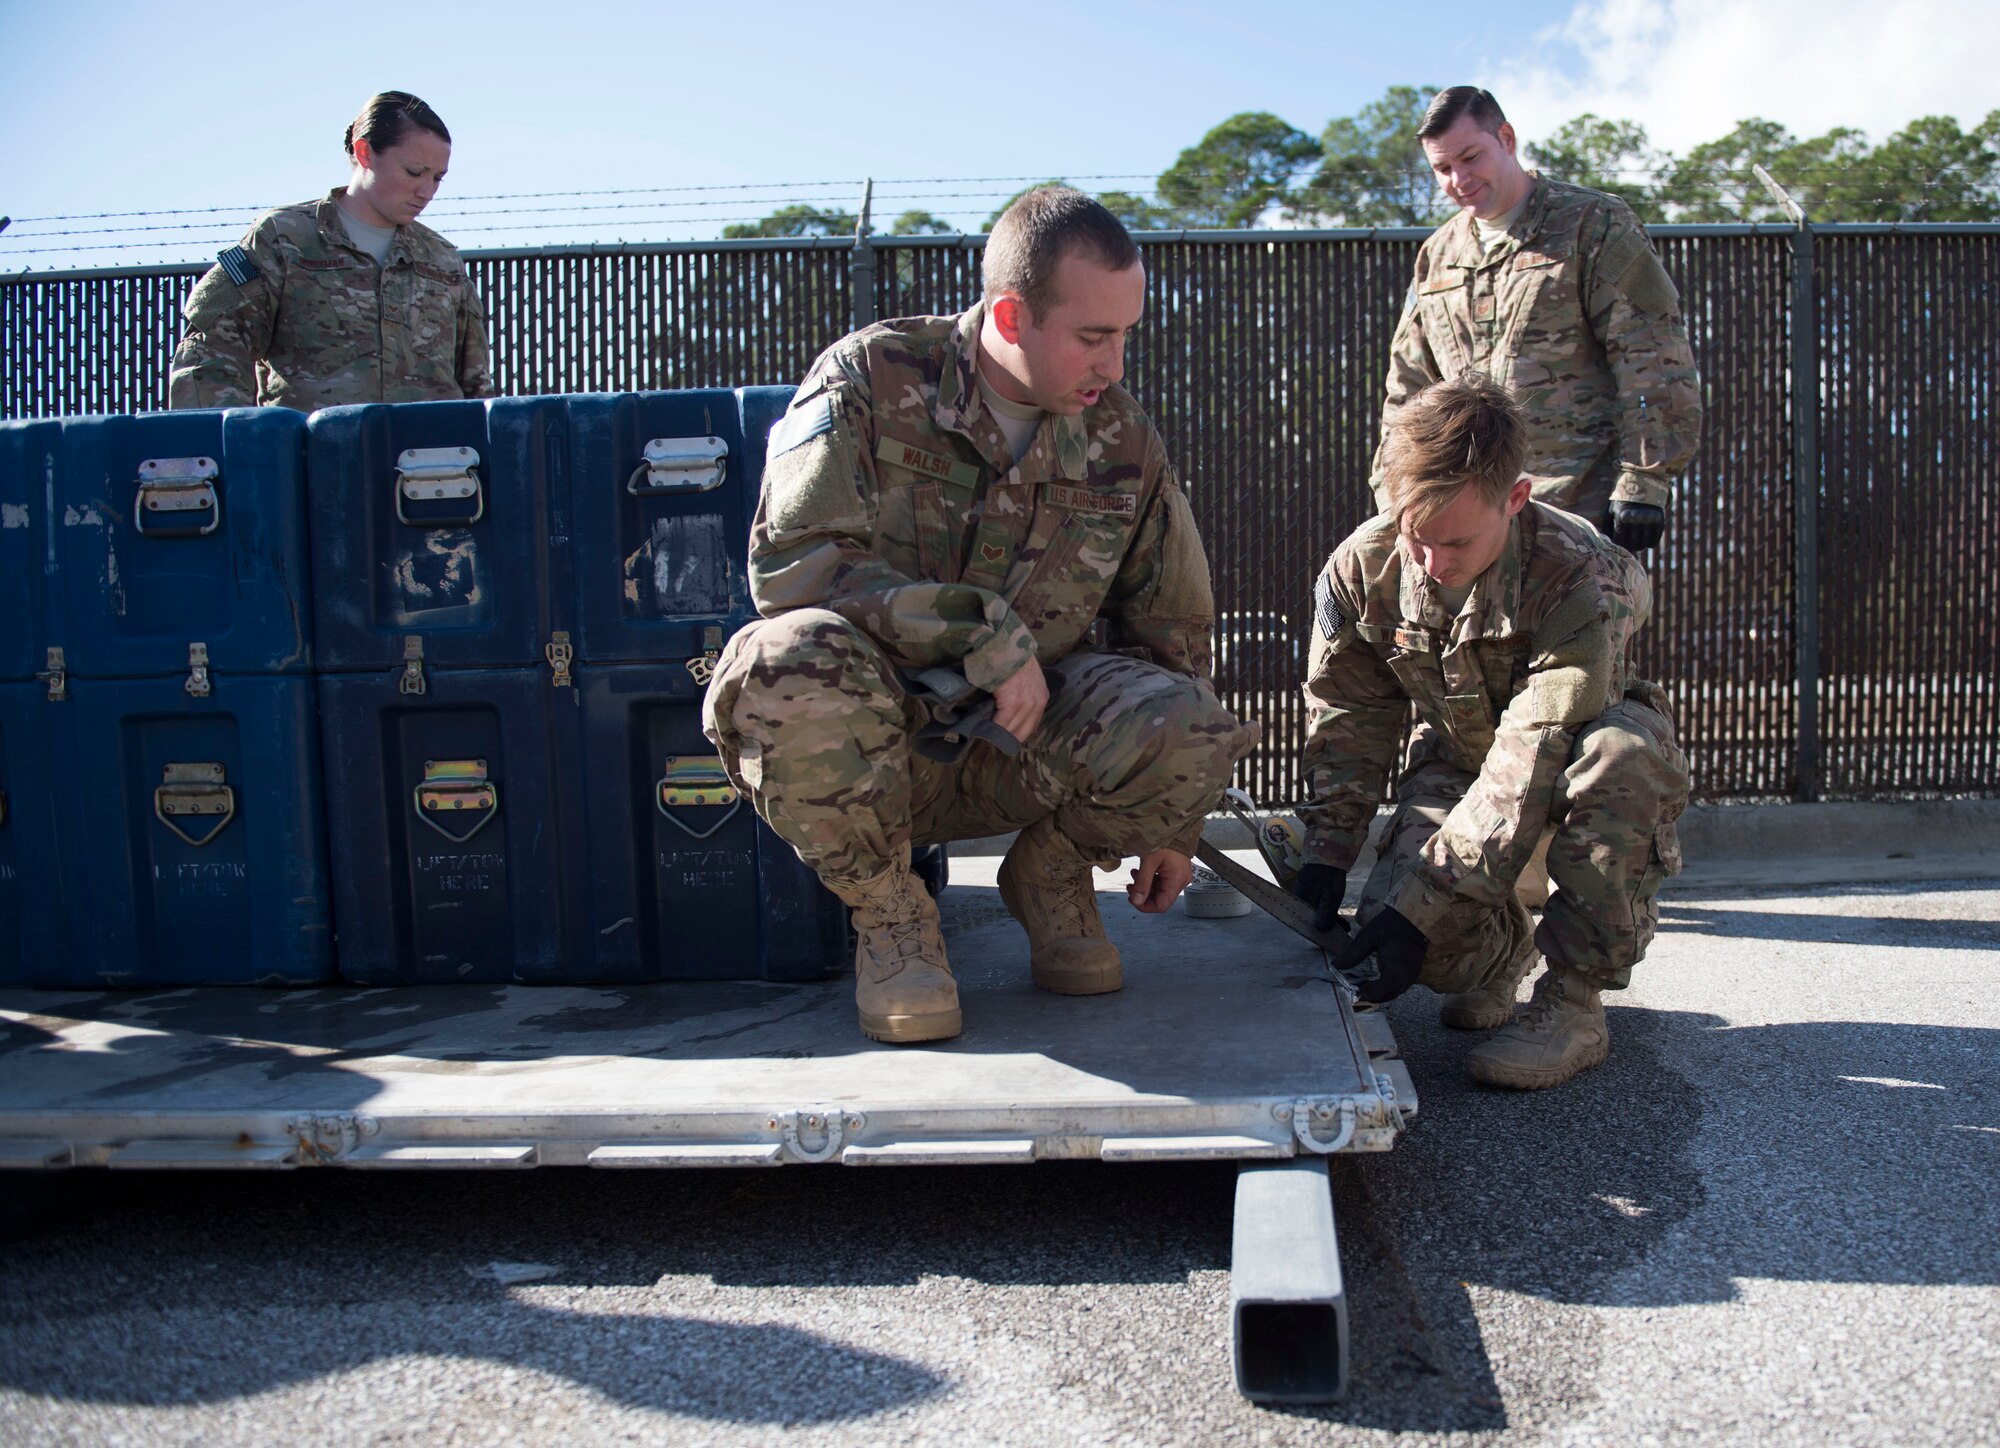 Staff Sgt. Brendon Walsh, an air terminal and aerial delivery craftsman with the 1st Special Operations Logistic Readiness Squadron, shows Staff Sgt. Jacob Wade, an aircrew flight equipment craftsman with the 4th Special Operations Squadron, how to strap down cargo during pallet build-up training at Hurlburt Field, Fla., Dec. 12, 2016. Pallet build-up training is an annual training that enables AFE Air Commandos to properly document and load cargo onto aircraft, ensuring readiness to execute global special operations. (U.S. Air Force photo by Senior Airman Krystal M. Garrett)